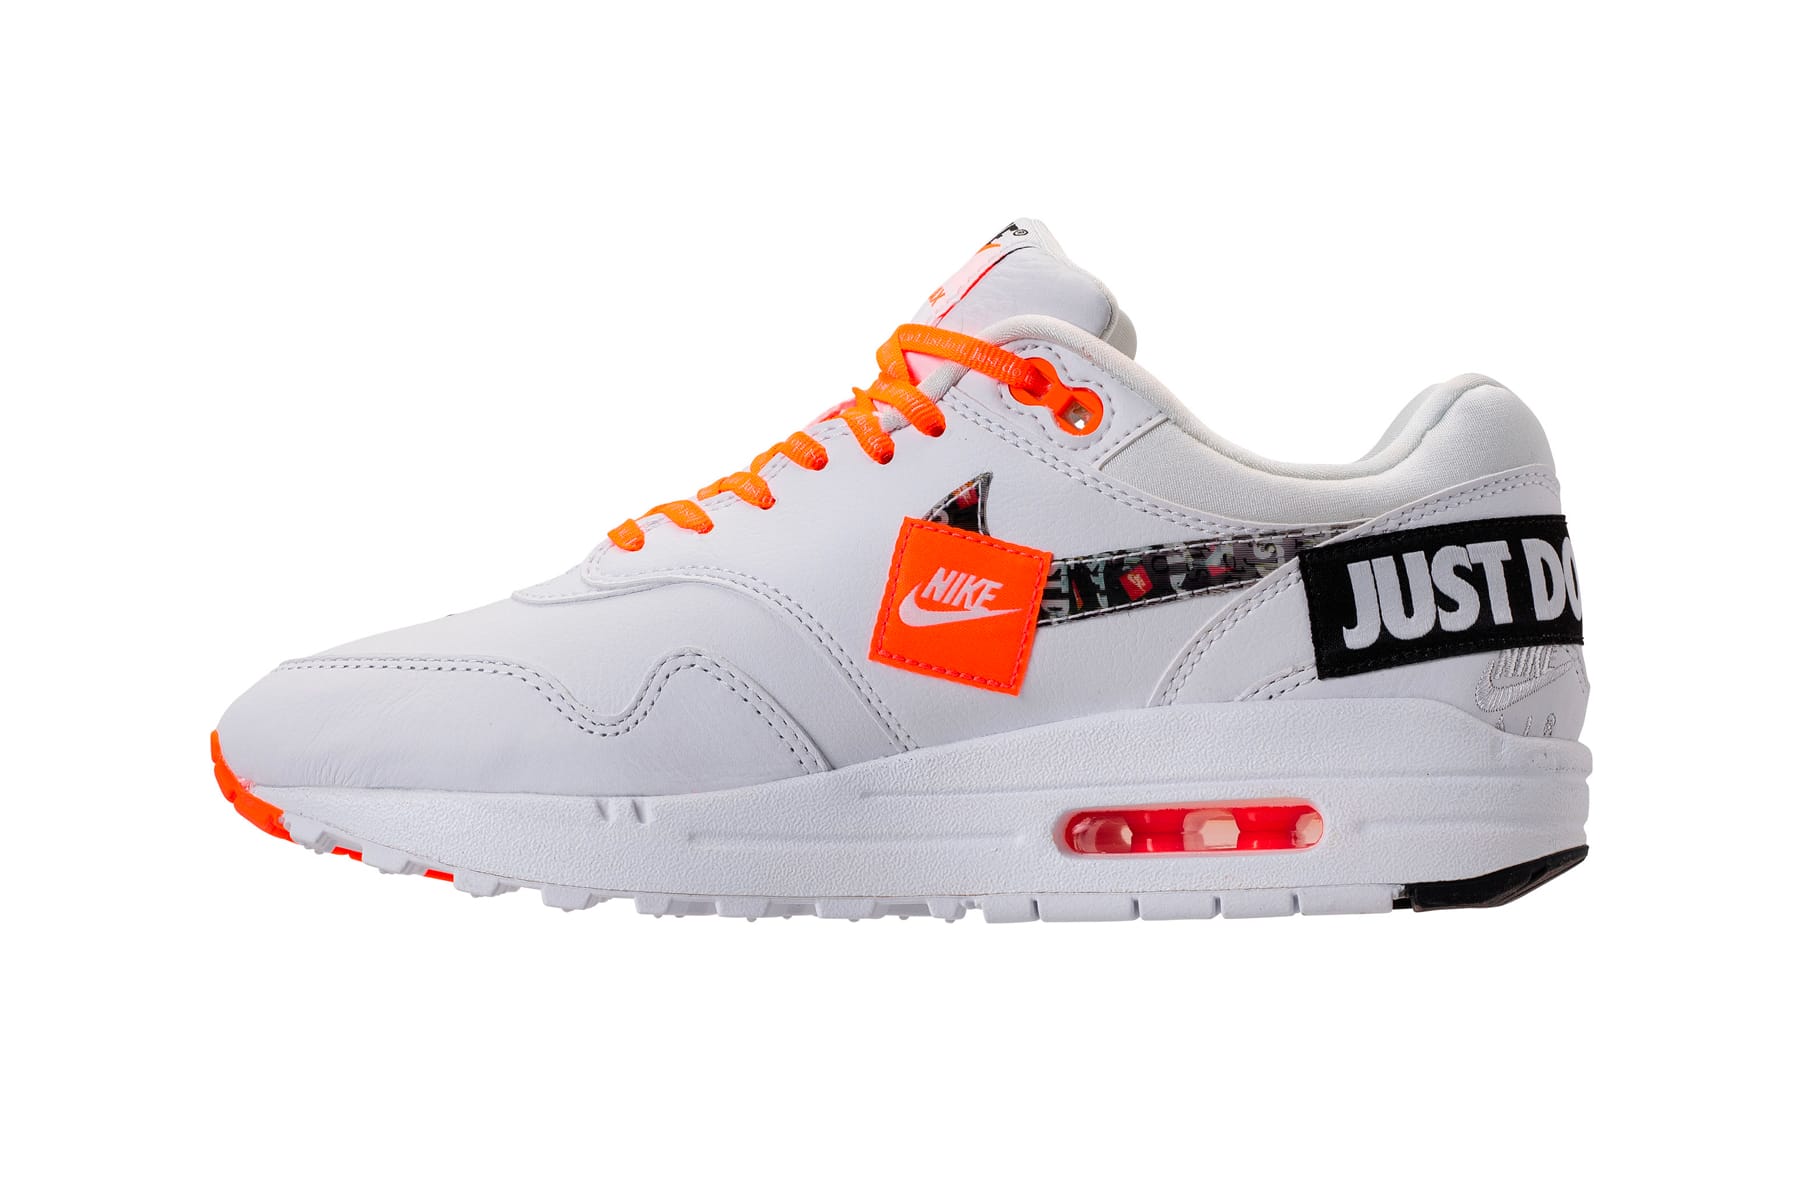 nike air max 1 just do it white women's shoe